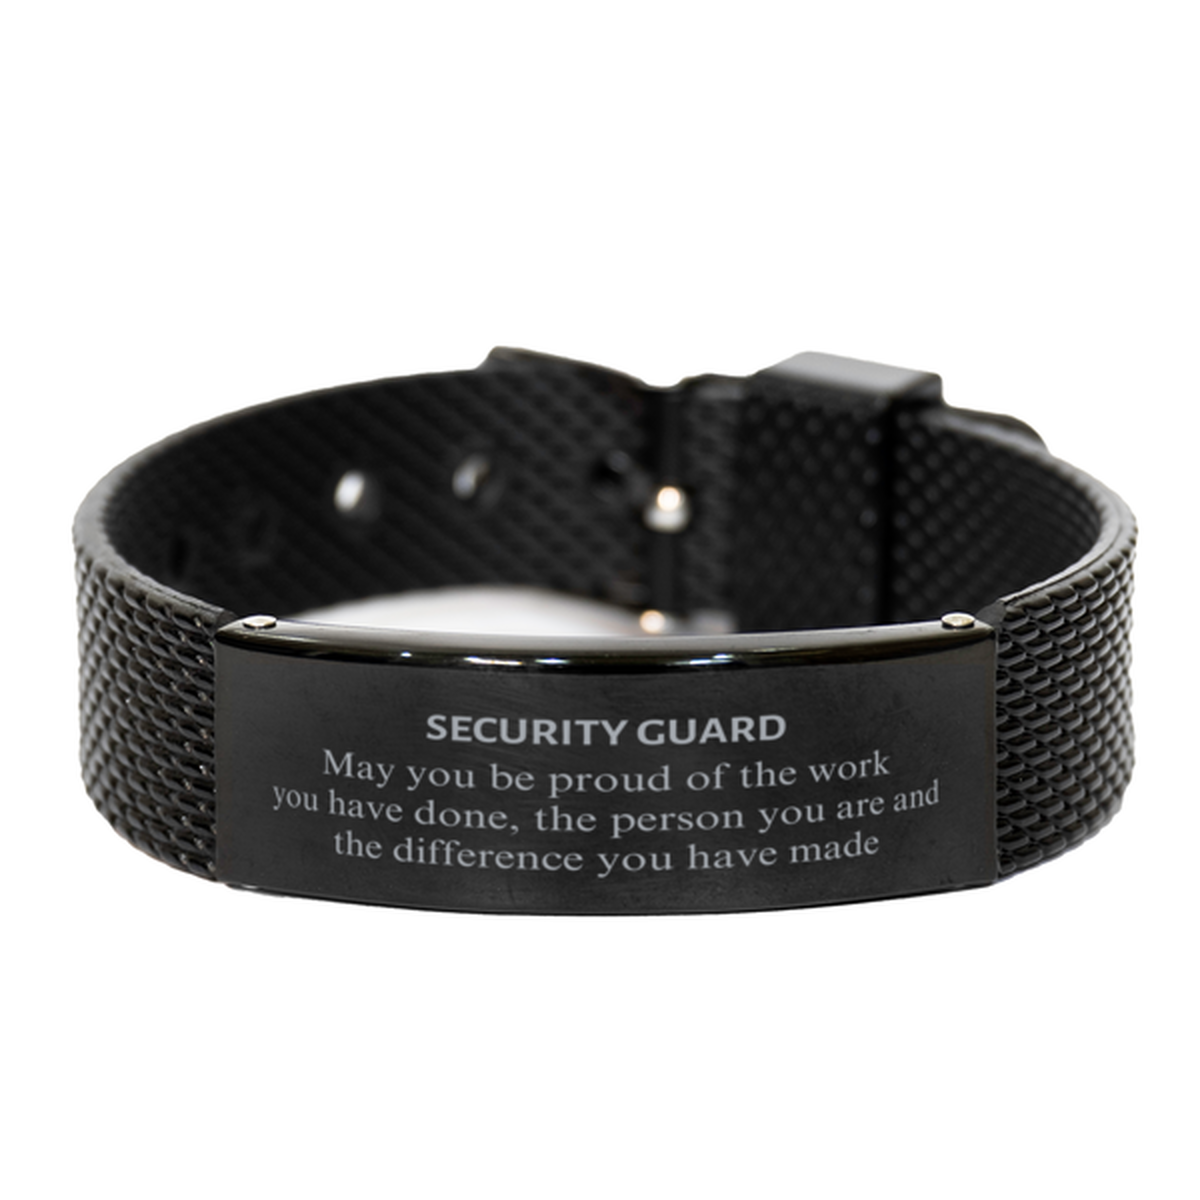 Security Guard May you be proud of the work you have done, Retirement Security Guard Black Shark Mesh Bracelet for Colleague Appreciation Gifts Amazing for Security Guard